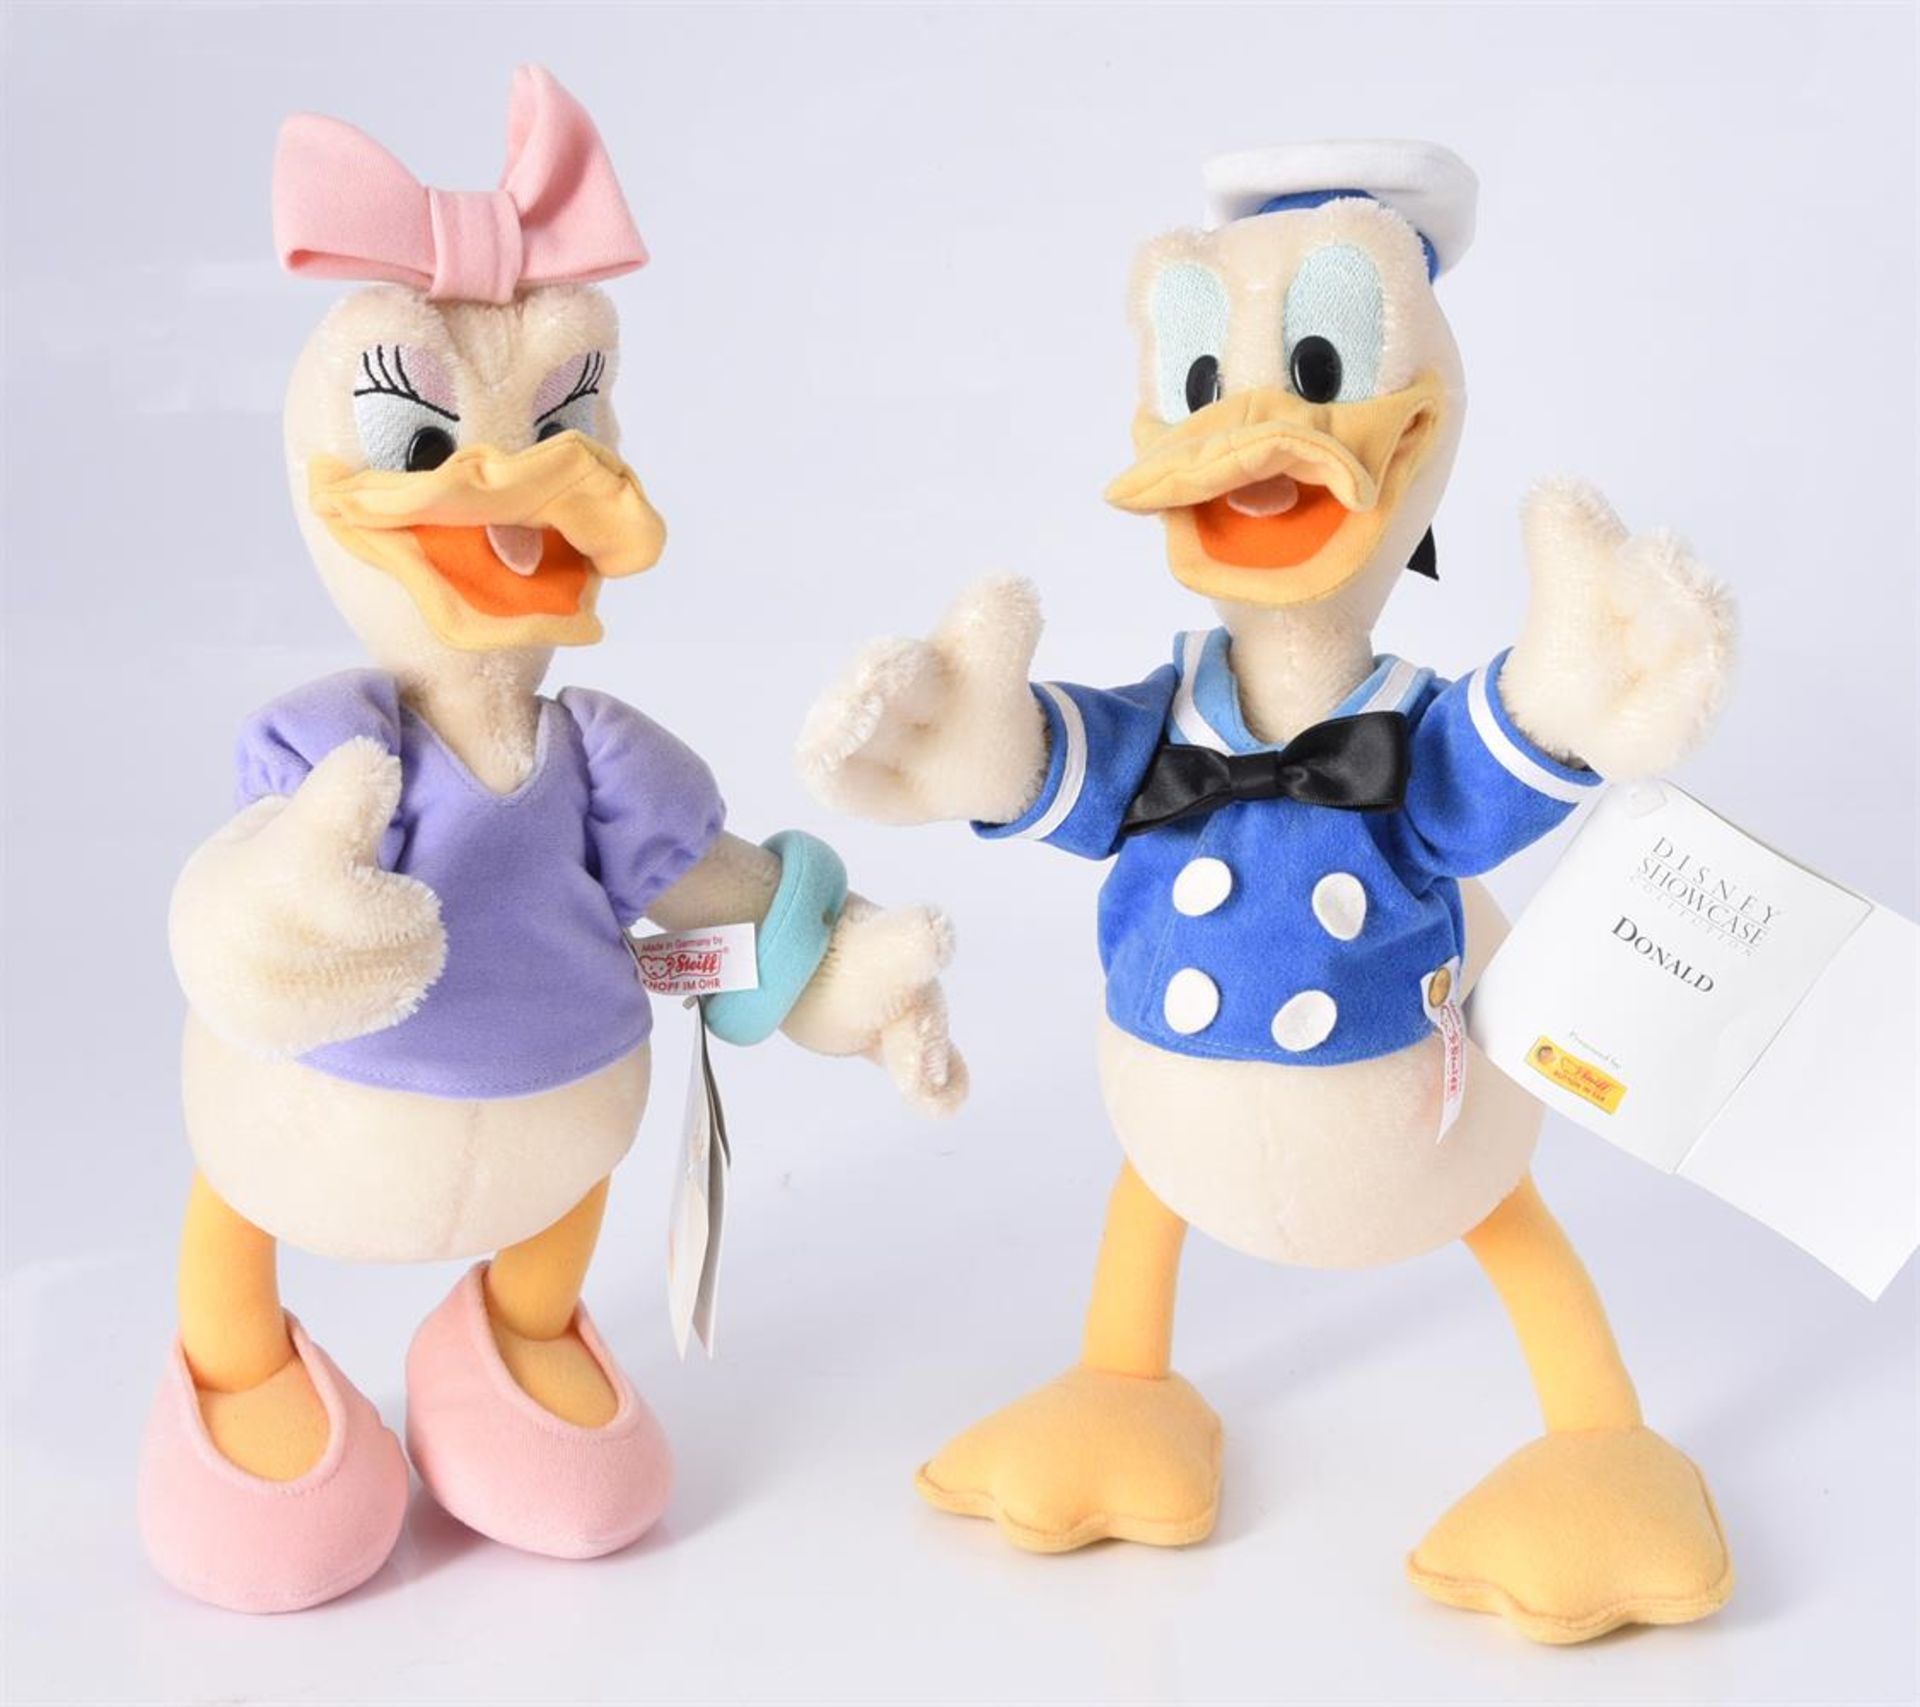 STEIFF, DONALD AND DAISY, 00675 and 01421, DISNEY SHOWCASE COLLECTION, CIRCA 2001